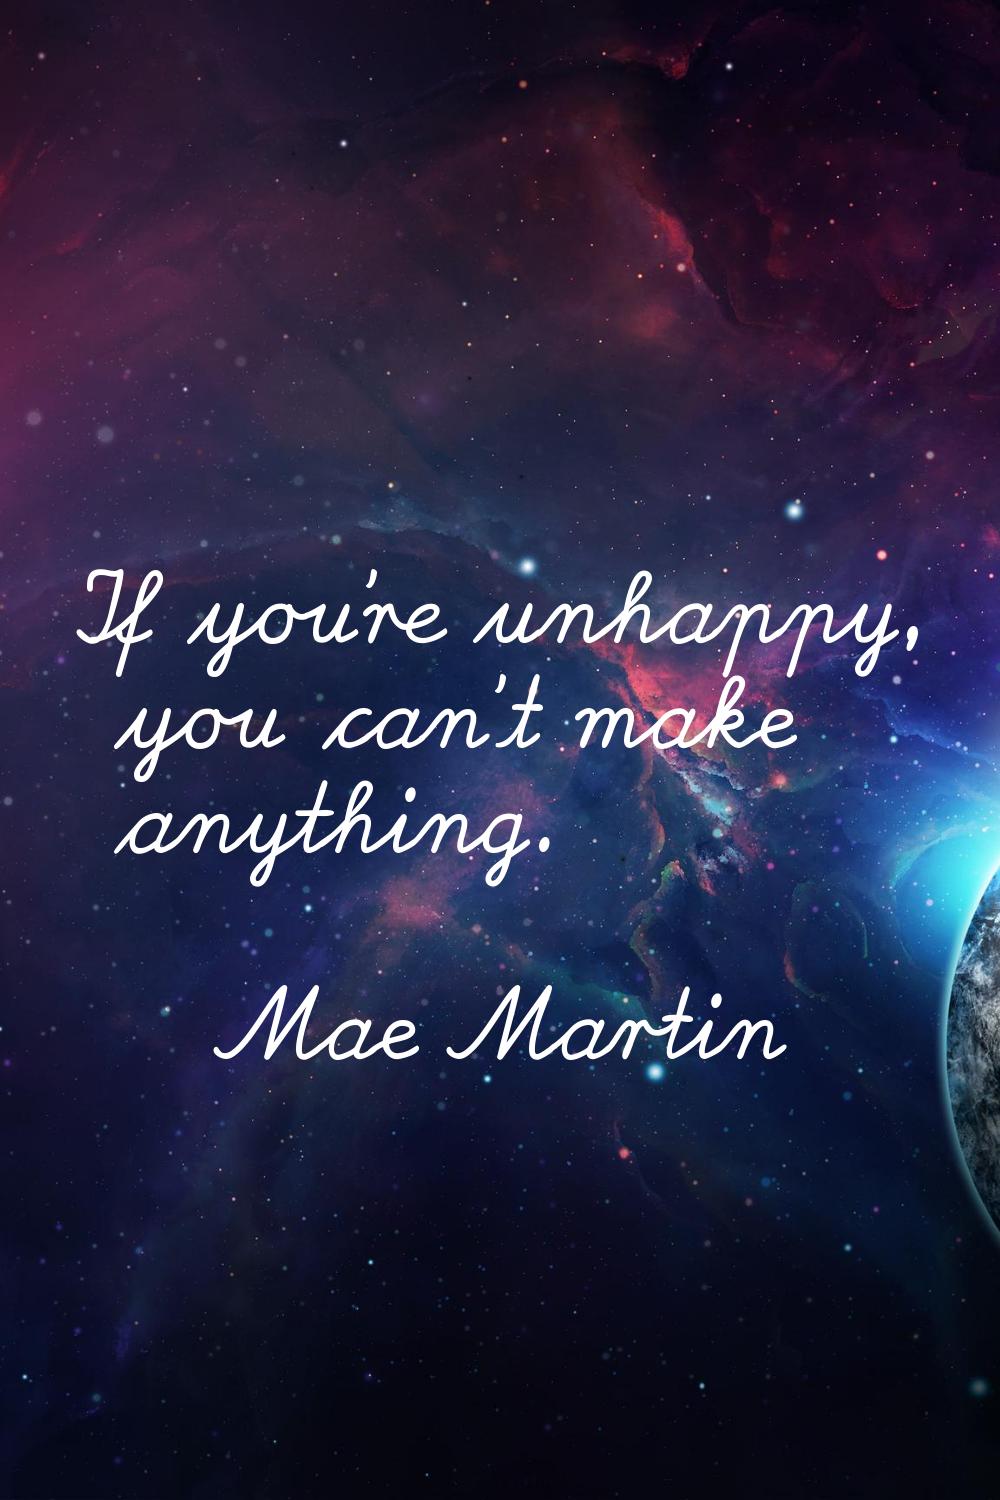 If you're unhappy, you can't make anything.